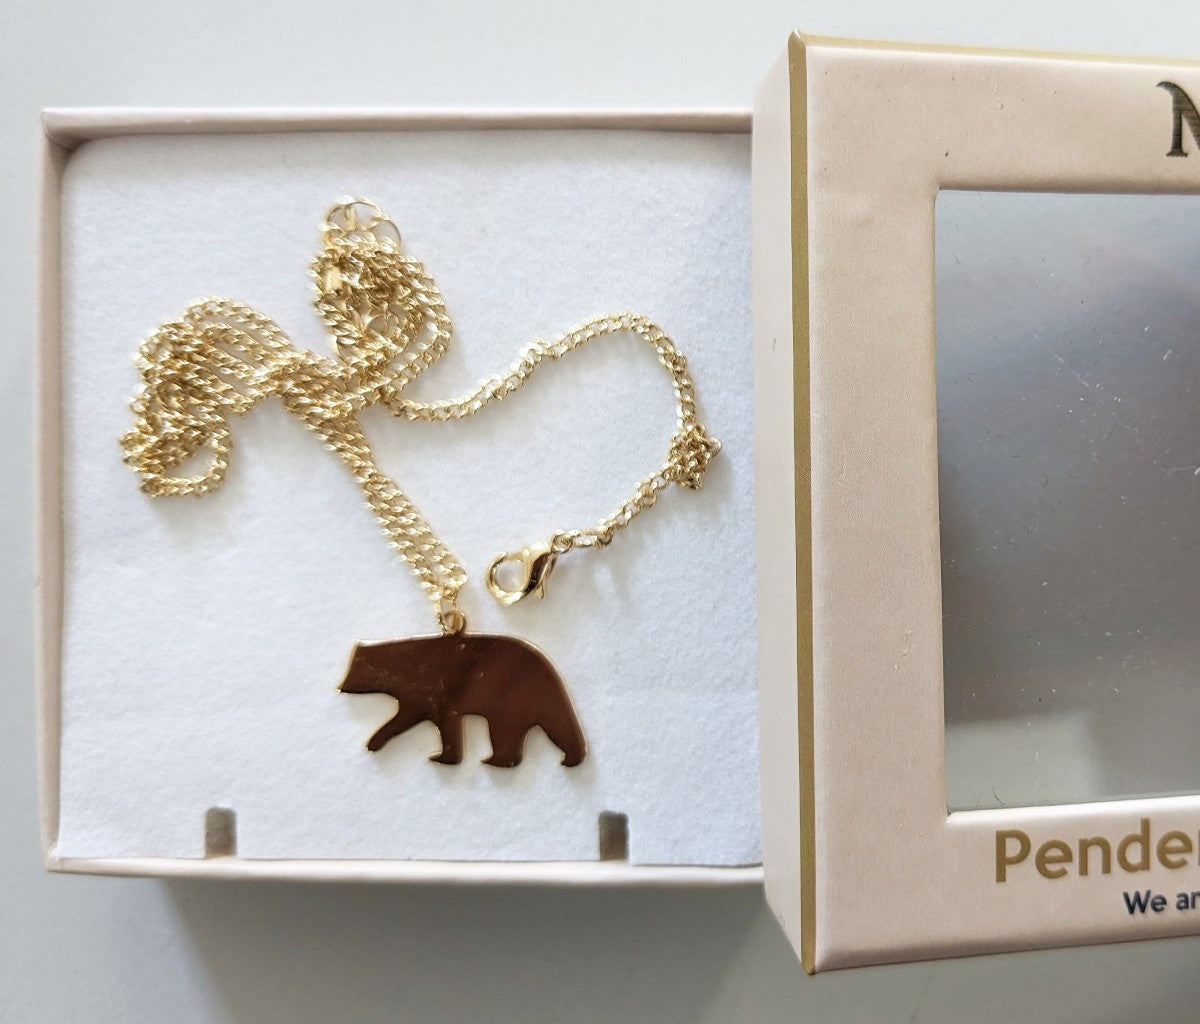 Pendentif collier ours polaire